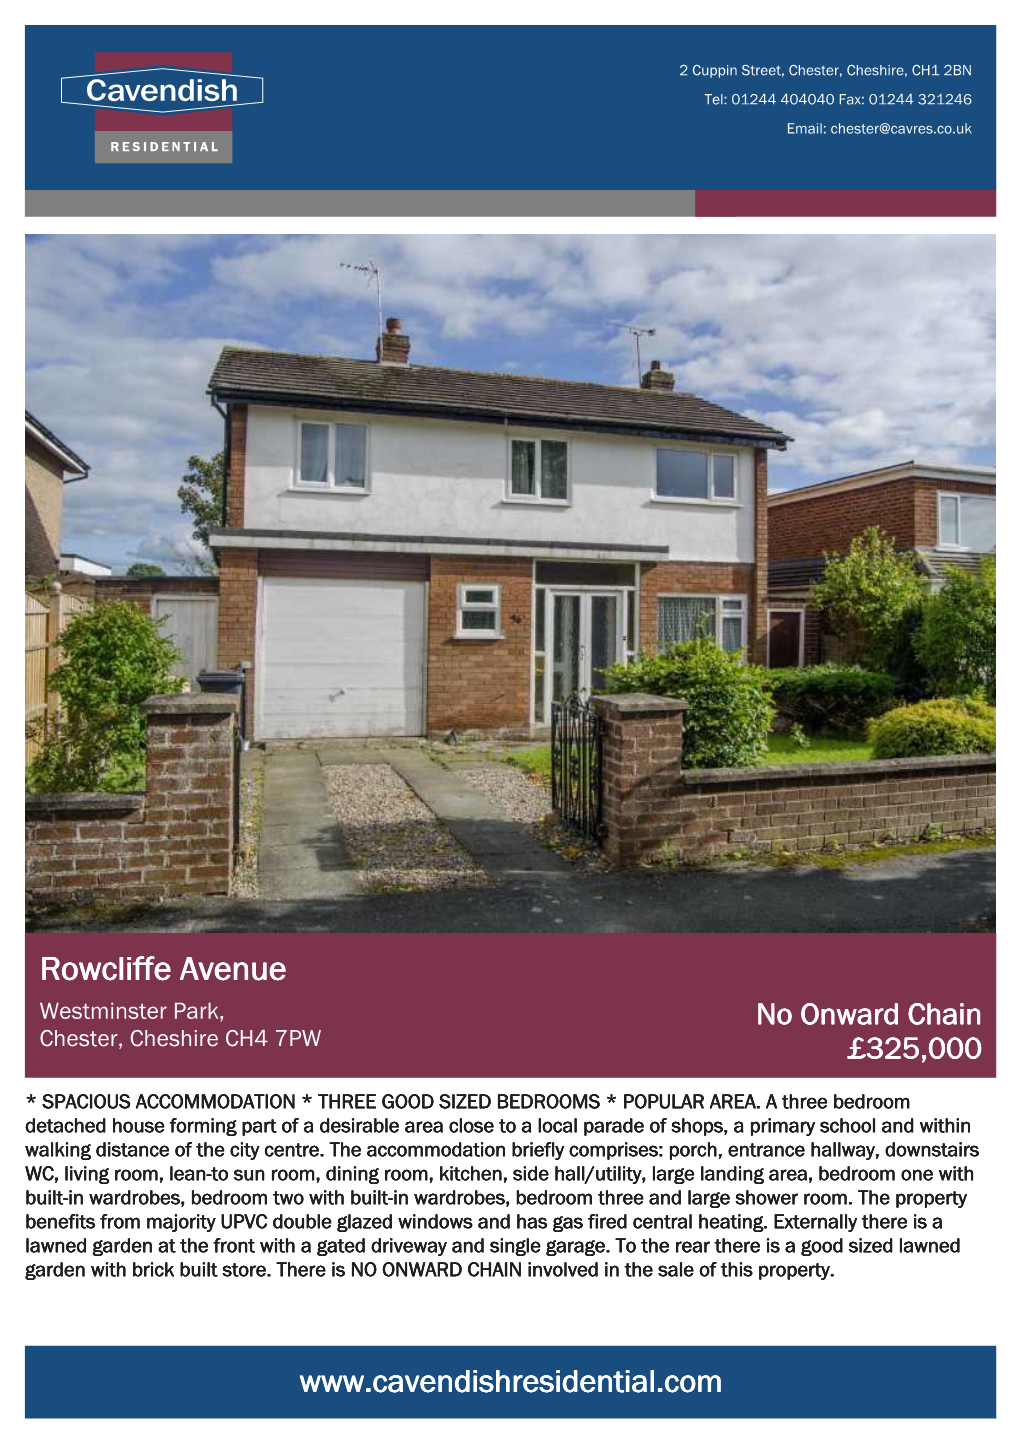 Rowcliffe Avenue Westminster Park, No Onward Chain Chester, Cheshire CH4 7PW £325,000